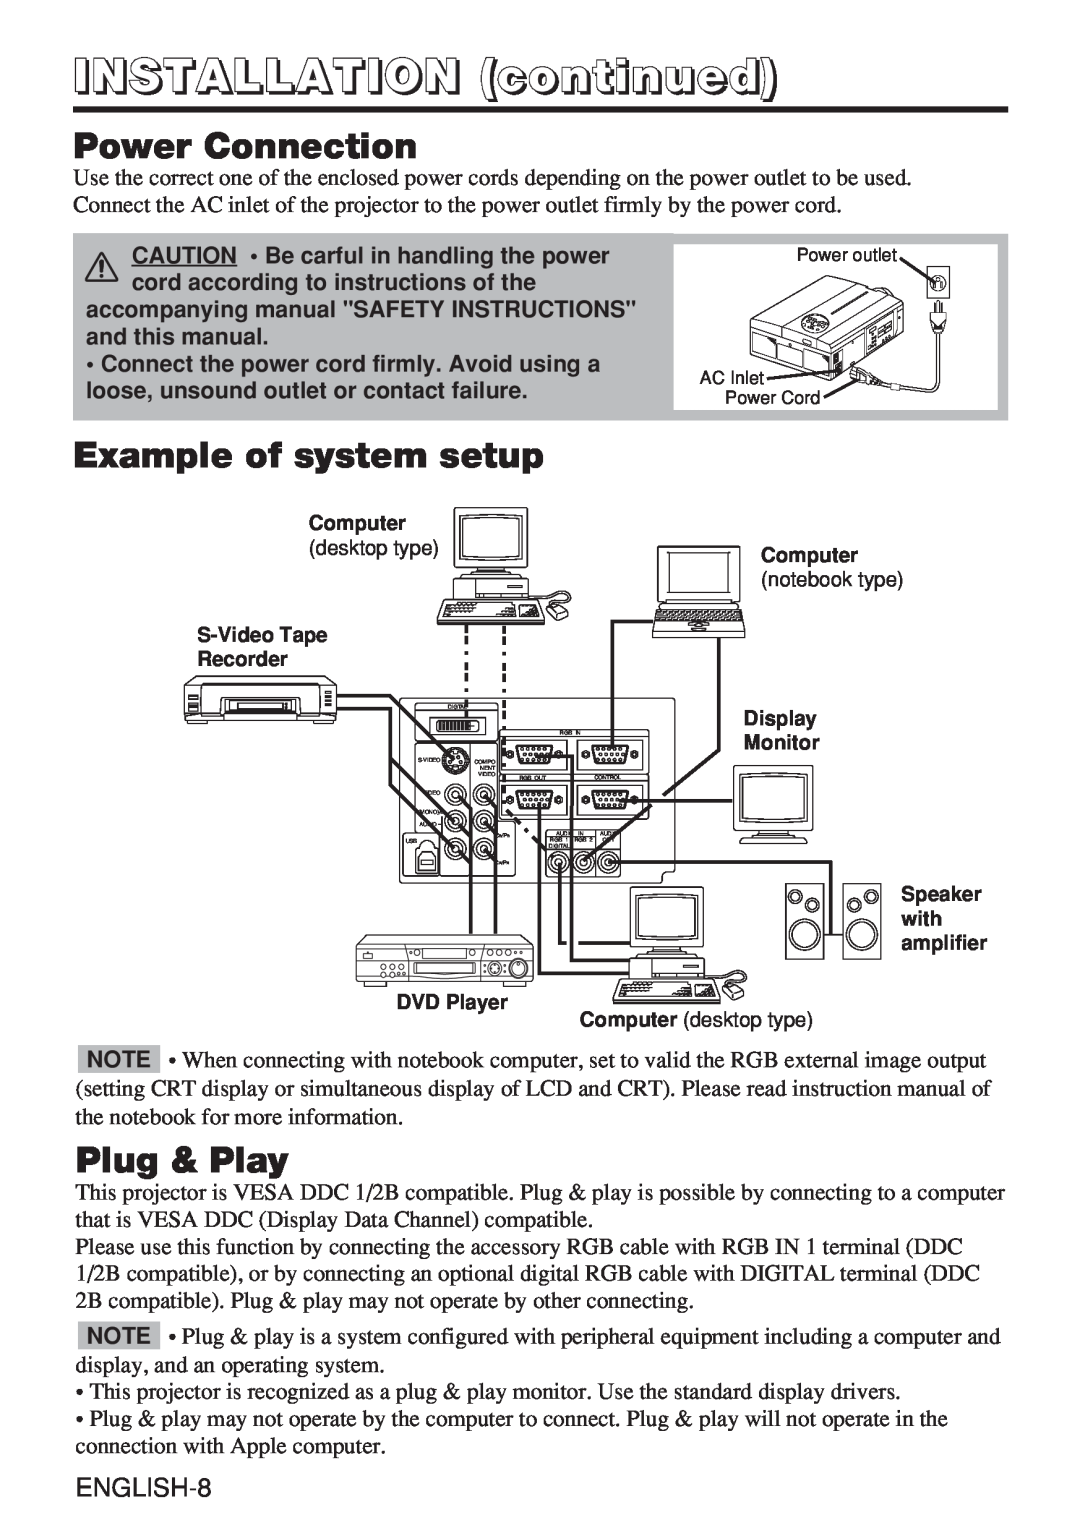 Hitachi CP-X985W user manual Power Connection, Example of system setup, Plug & Play, INSTALLATION continued, ENGLISH-8 